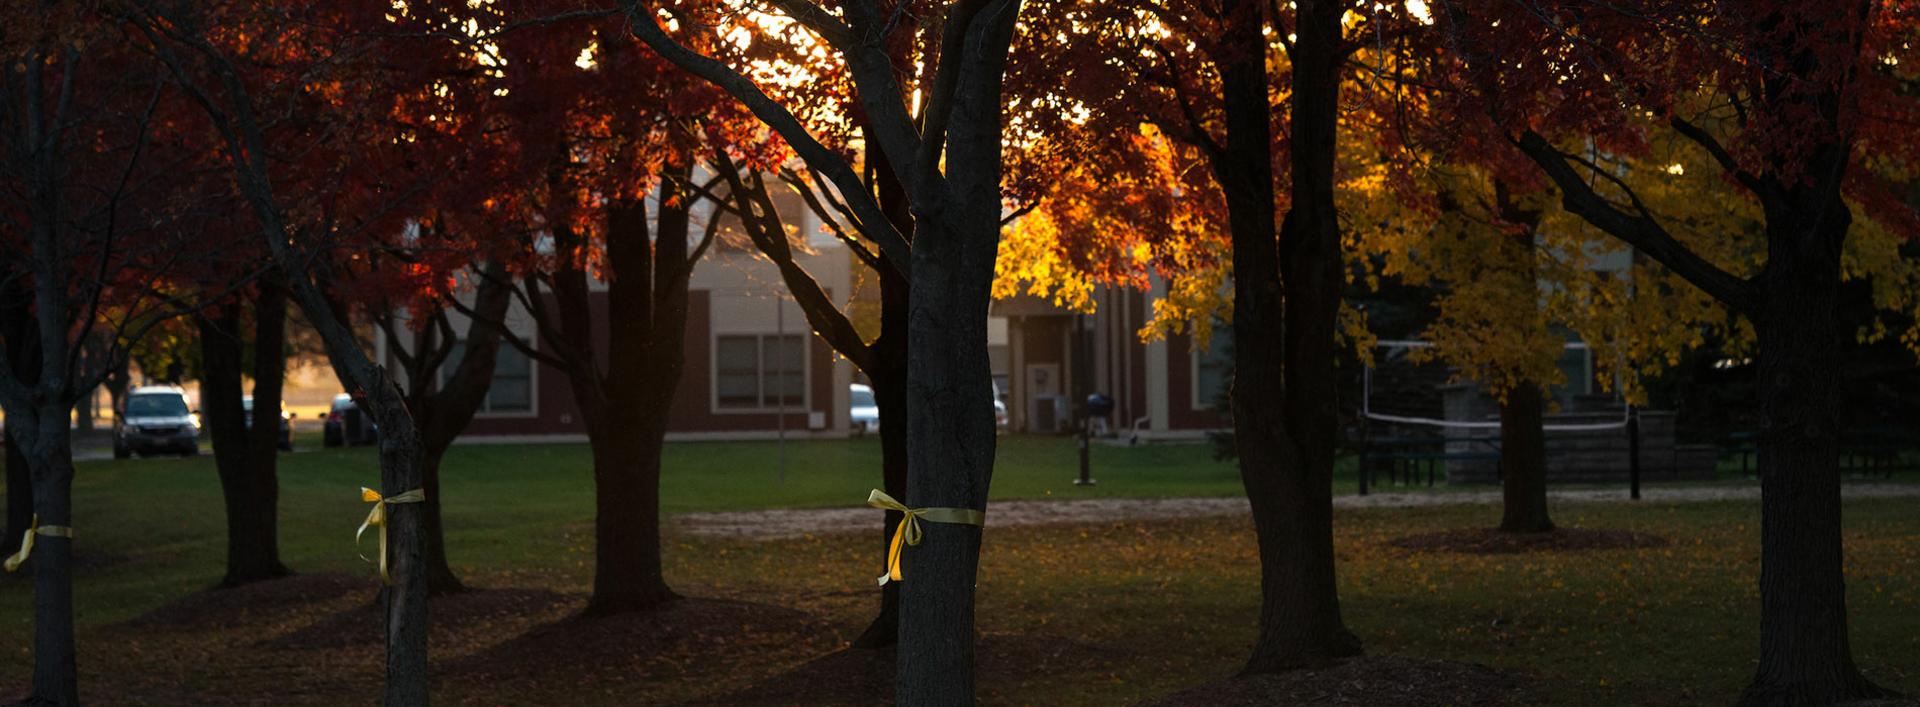 UIS Campus in the Fall